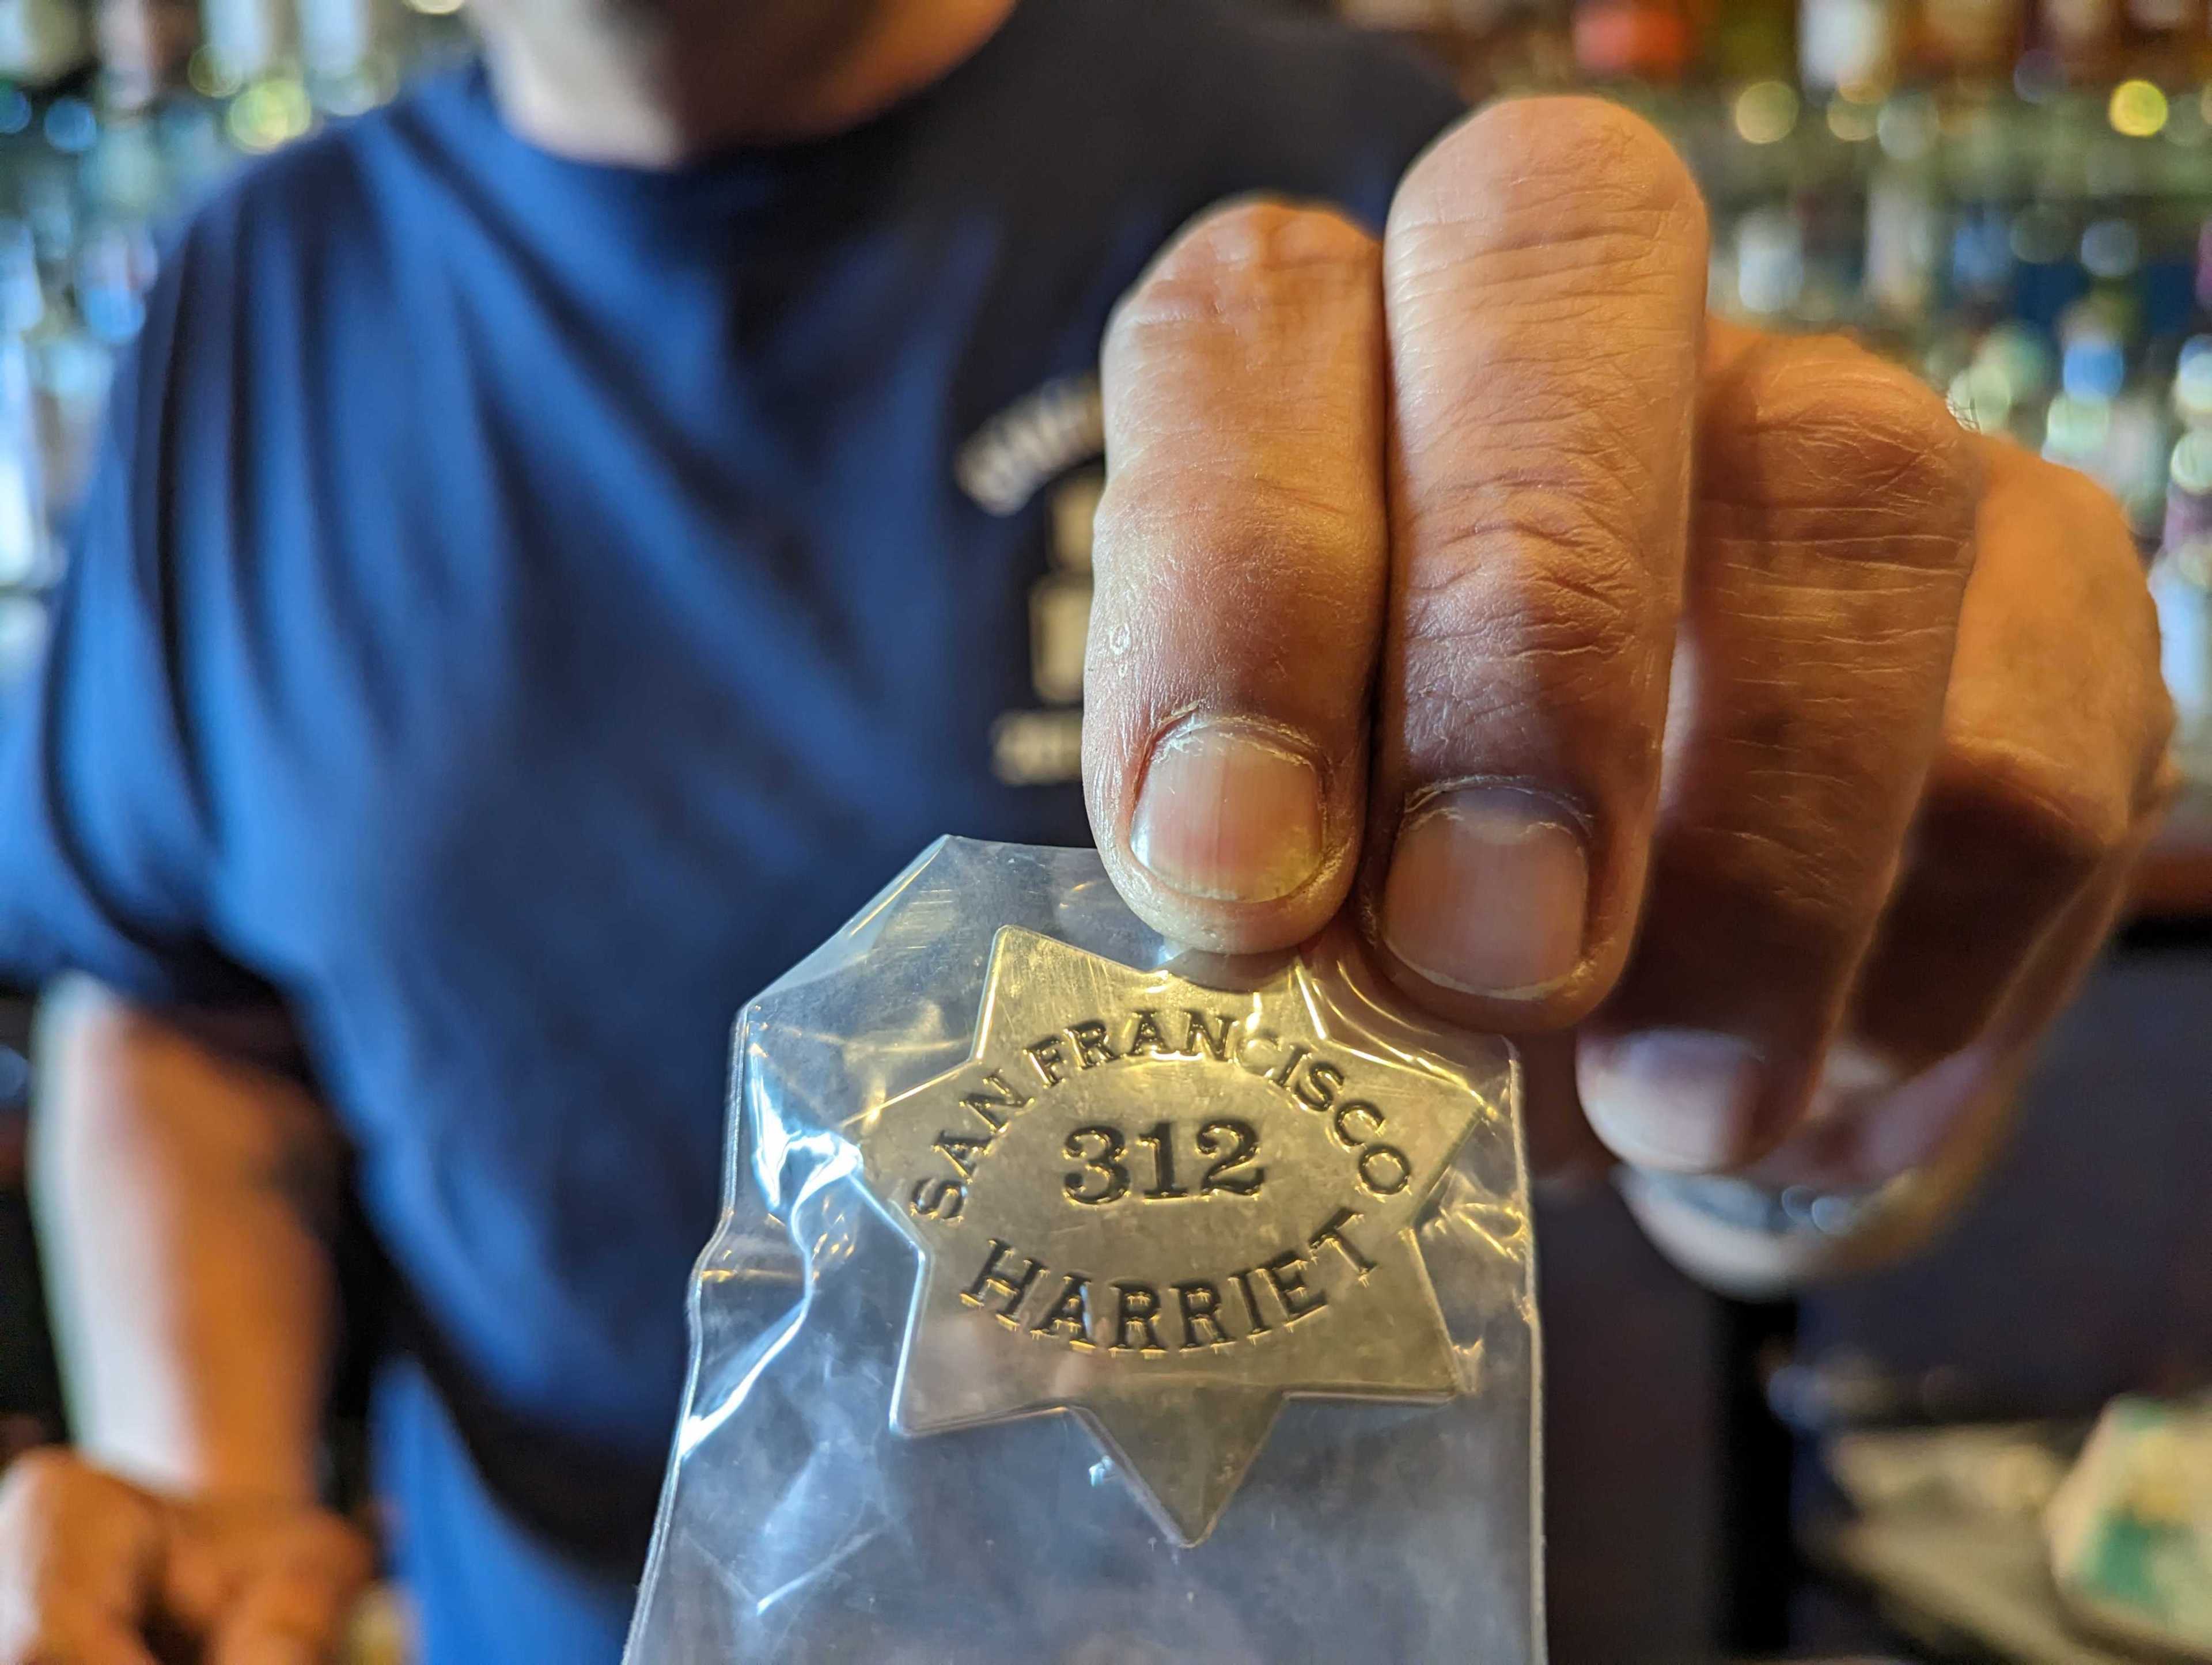 Bar owner Jeffrey Paz shows a pin modeled after a law enforcement badge that features its street address.